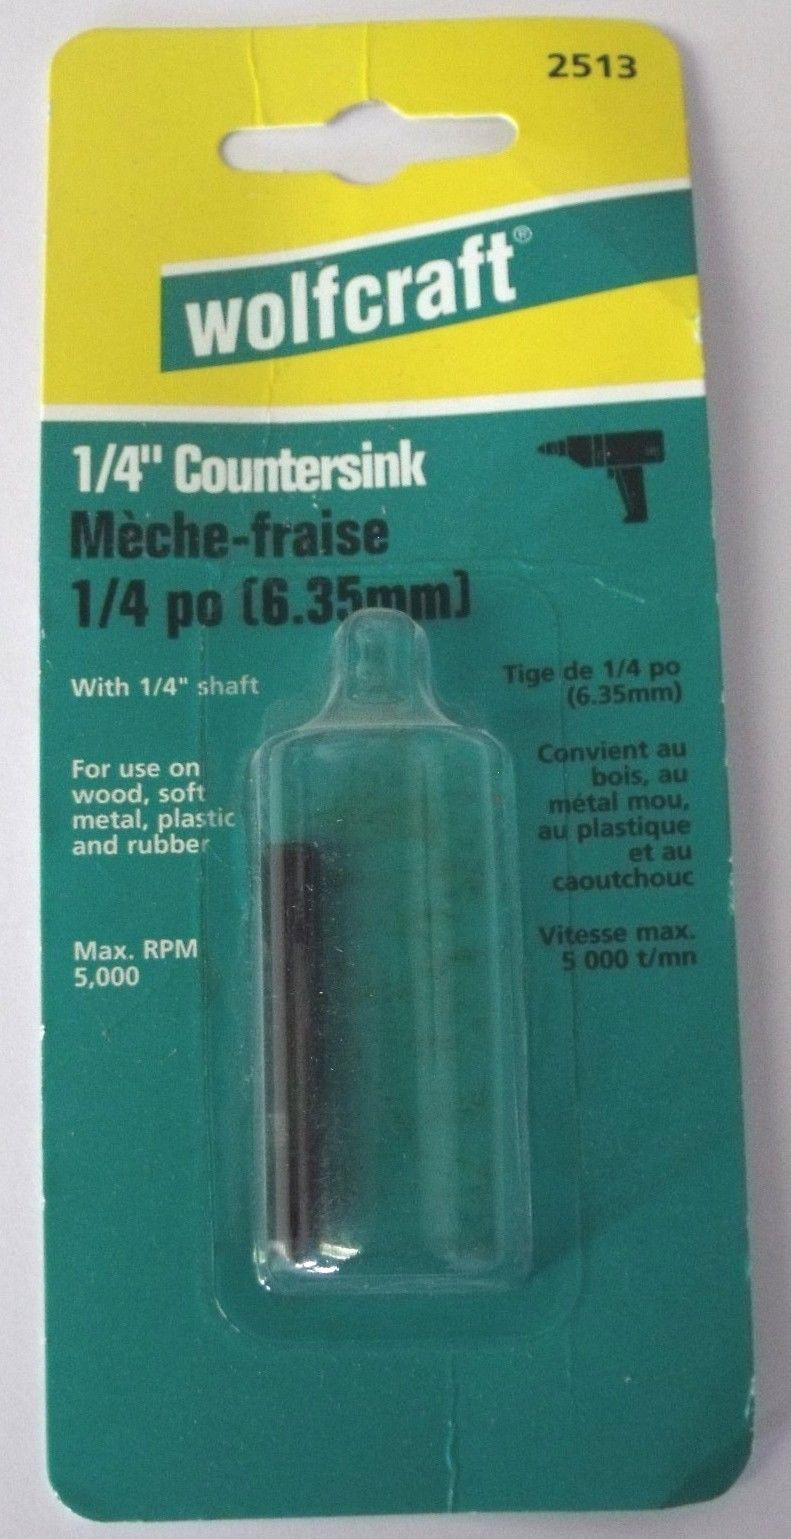 Wolfcraft 2513 1/4" Countersink Made in Germany